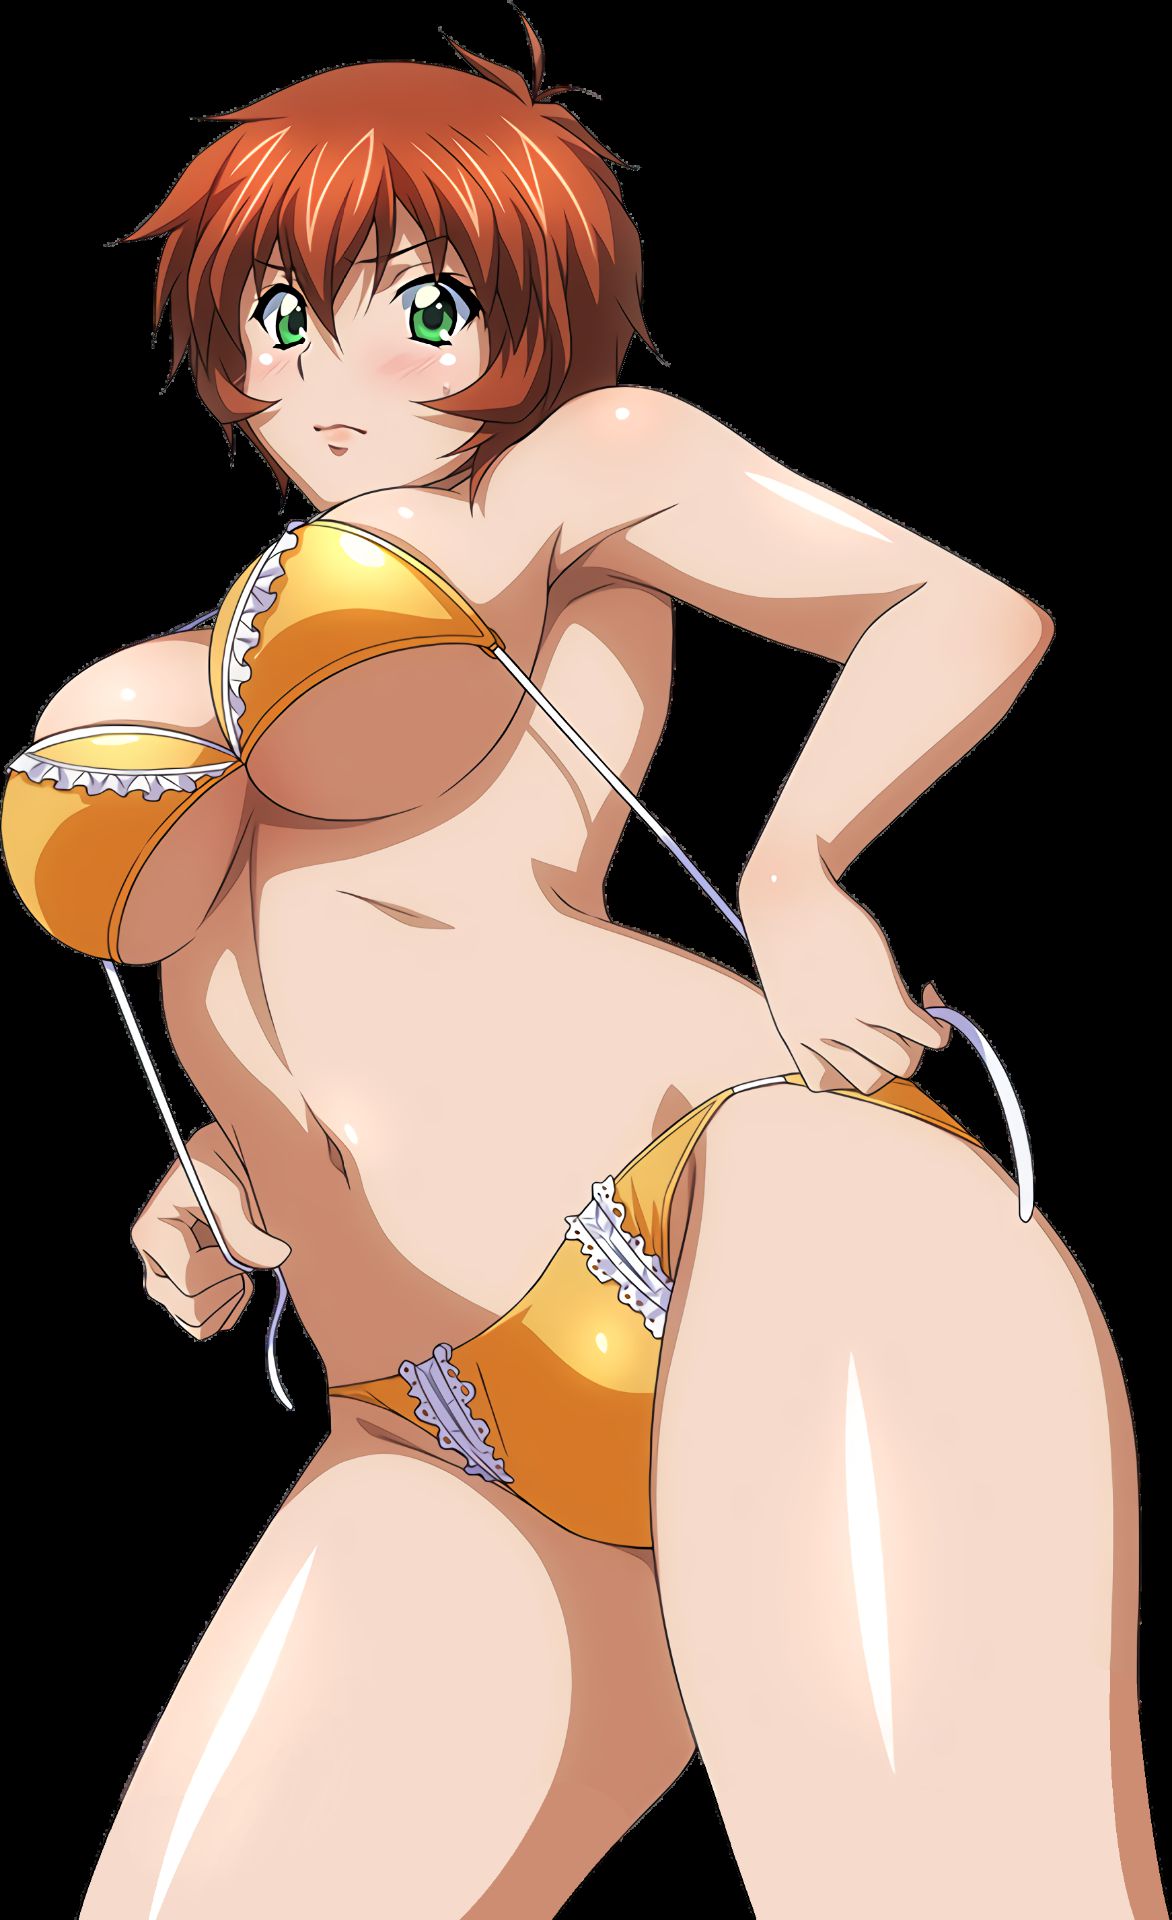 [Erotic photoshop Chara material] PNG background transparent erotic image material such as anime character that 254 17